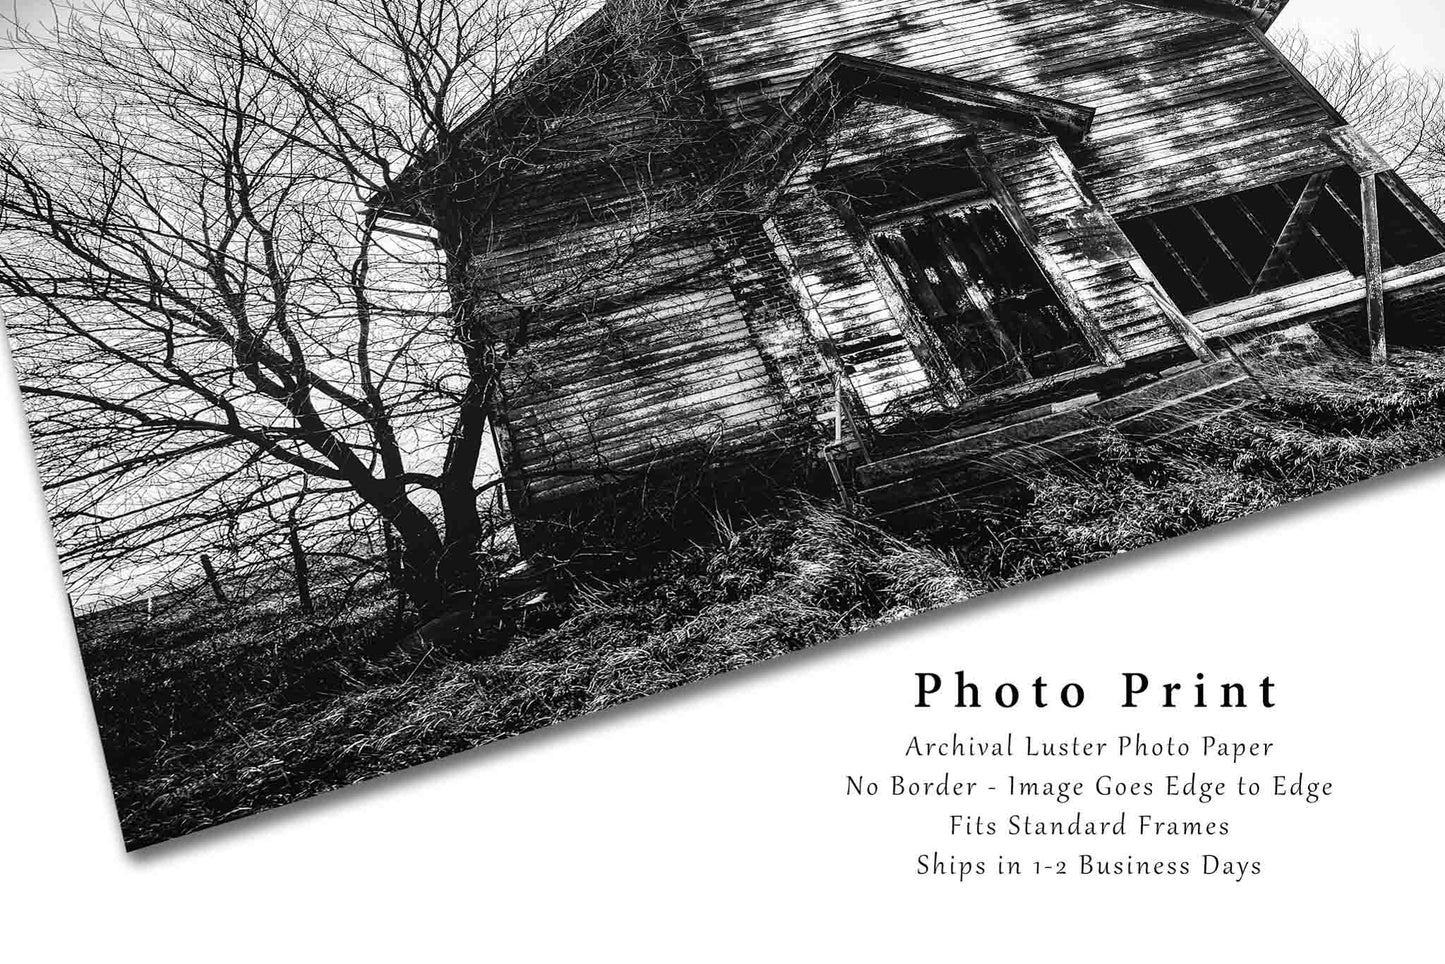 Black and White Photography Print - Picture of Old Abandoned School House in Iowa Fixer-Upper Shabby Chic Home Decor Wall Art Photo Artwork